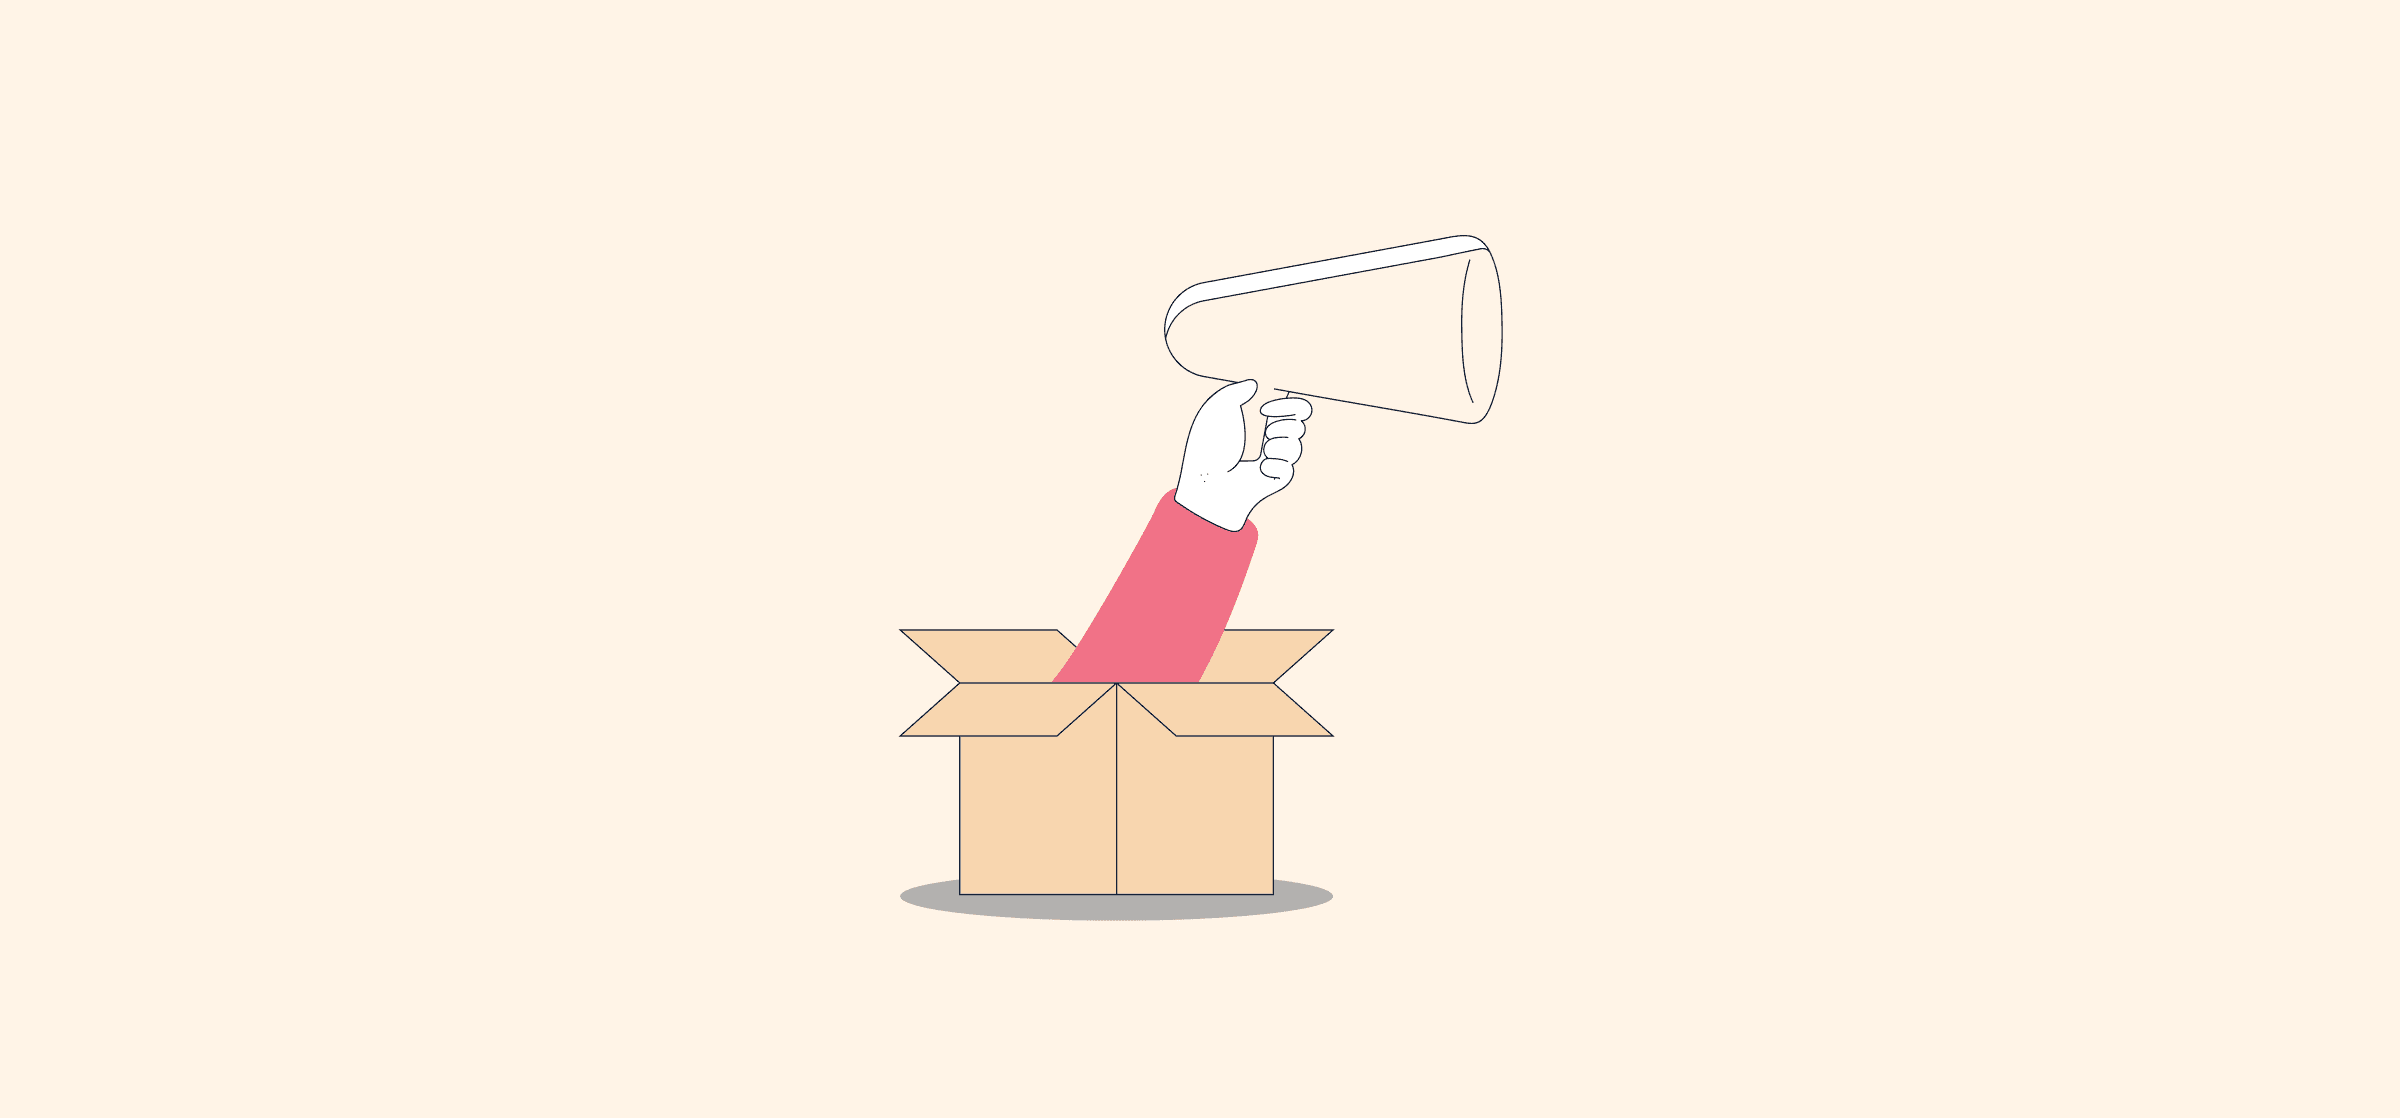 A hand emerging from a cardboard box holding a megaphone, representing project management tools and techniques.